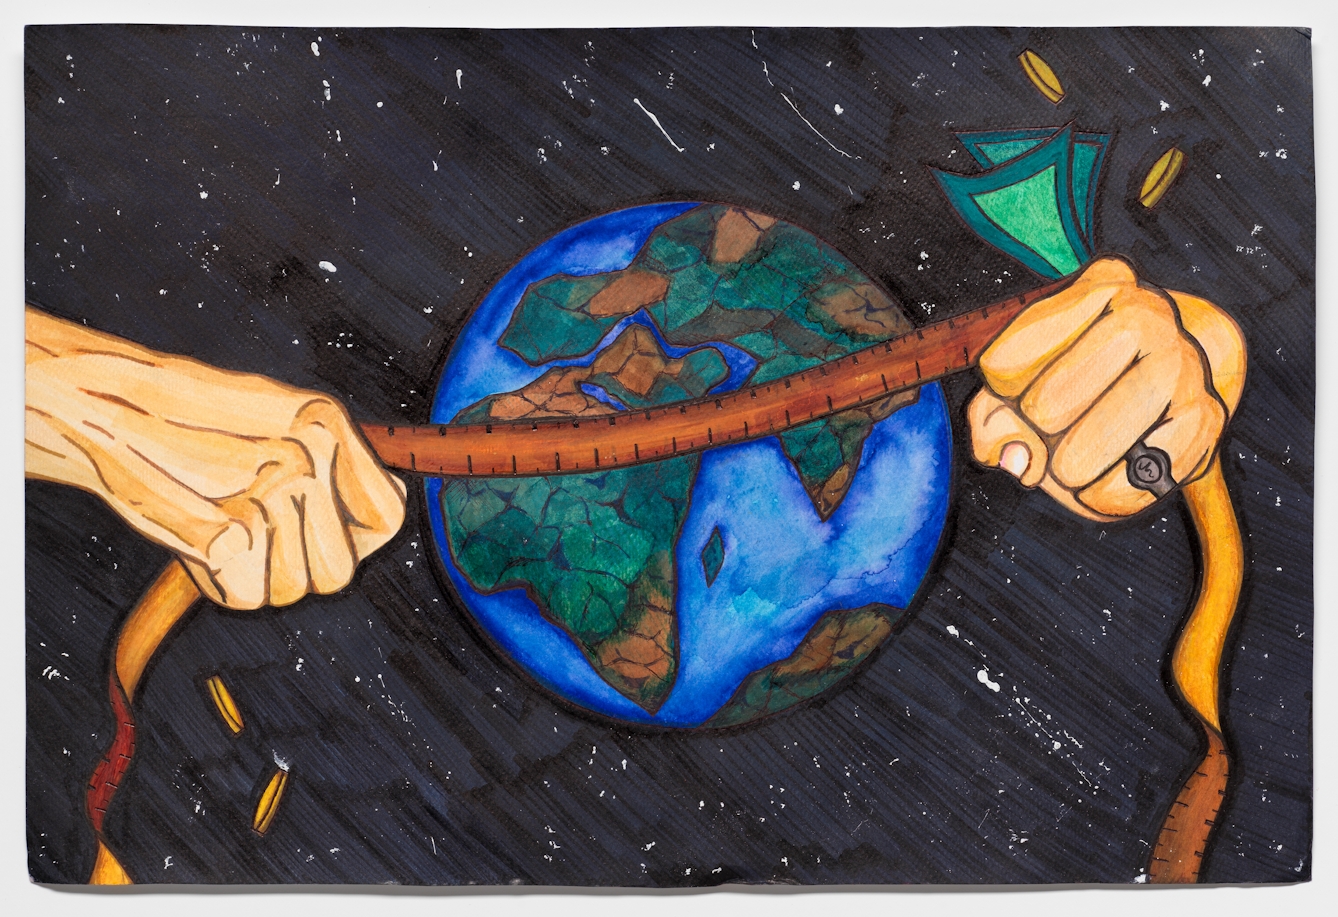 Colourful artwork made with paint and ink on textured watercolour paper. The artwork shows planet earth set amongst the stars of the galaxy. The shapes of the continents can be made out, with Africa and India at the fore. A pair of white hands appear either side of the planet, gripping tightly to a flexible tape measure. The hand on the right wears a signet ring and clutches green monetary notes. Golden coins fall from this hand and the one on the left.